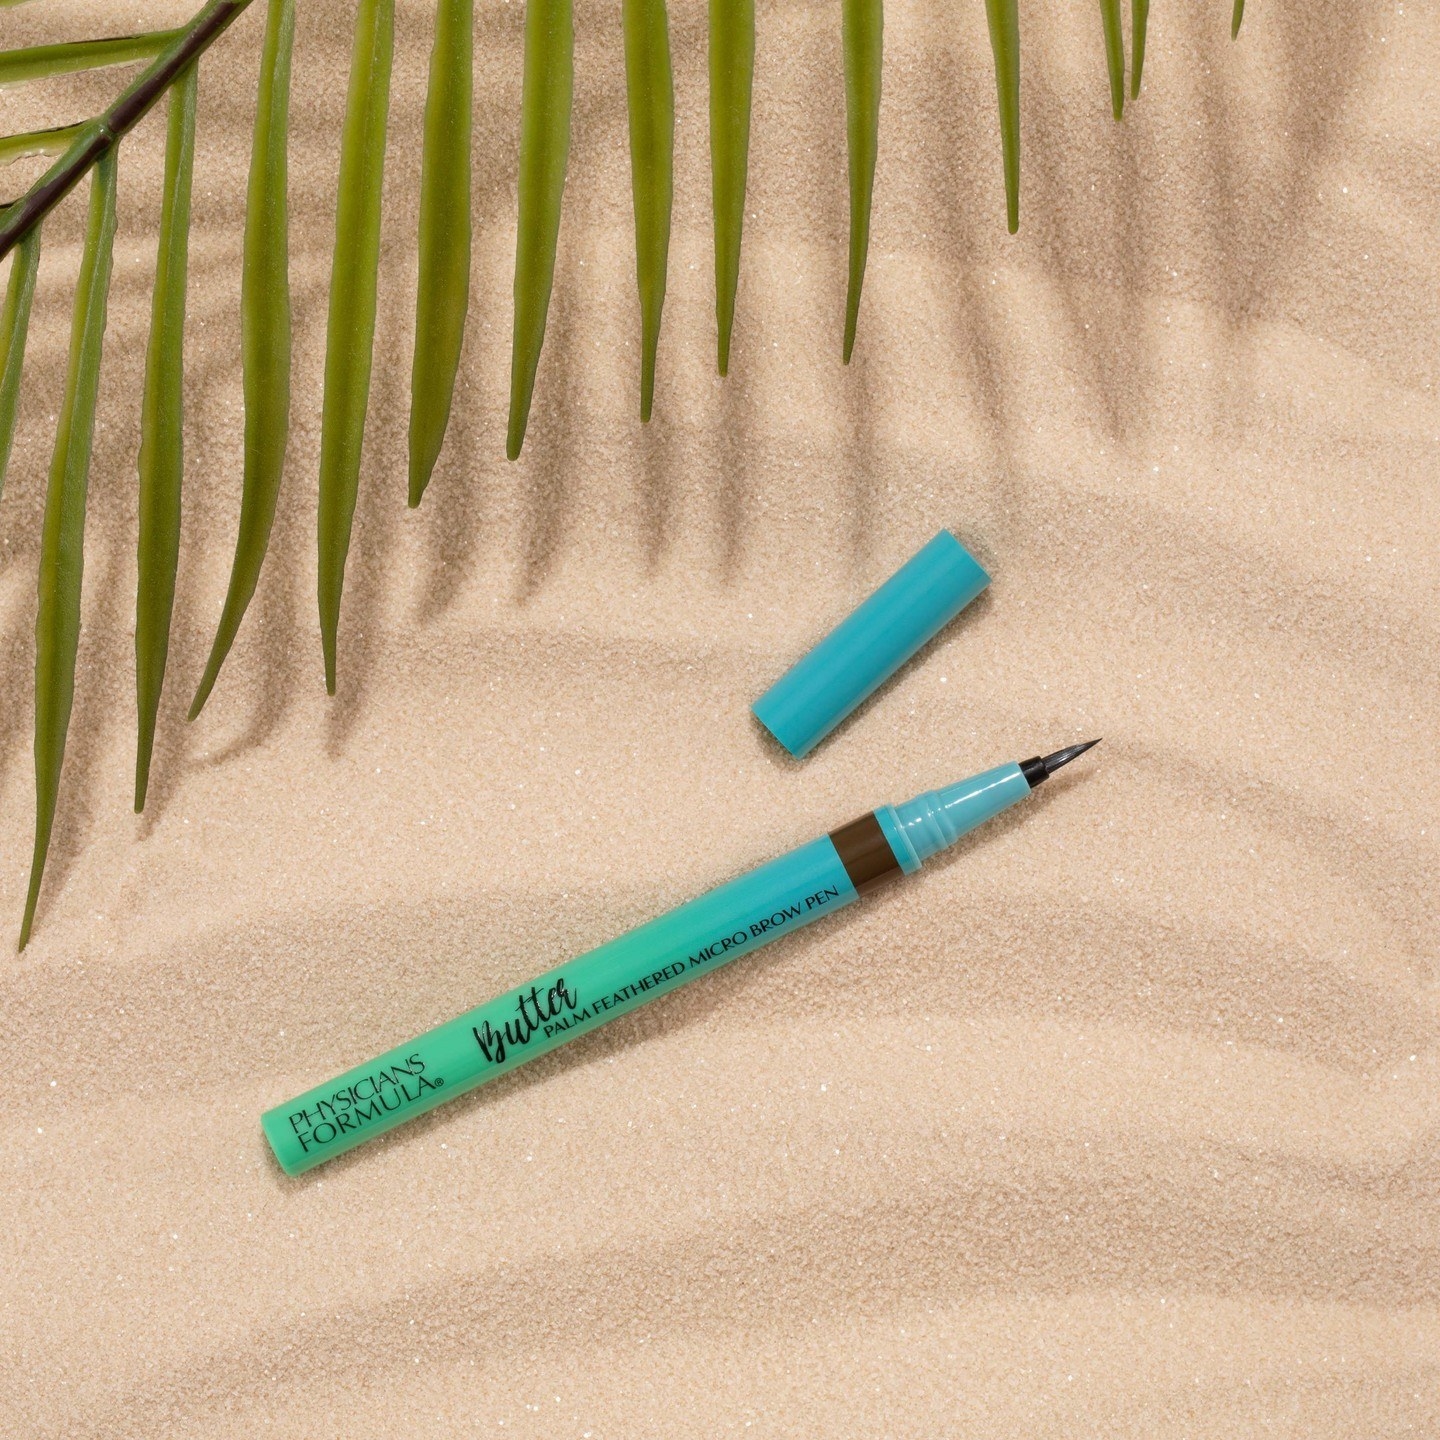 the brow pen laying in sand